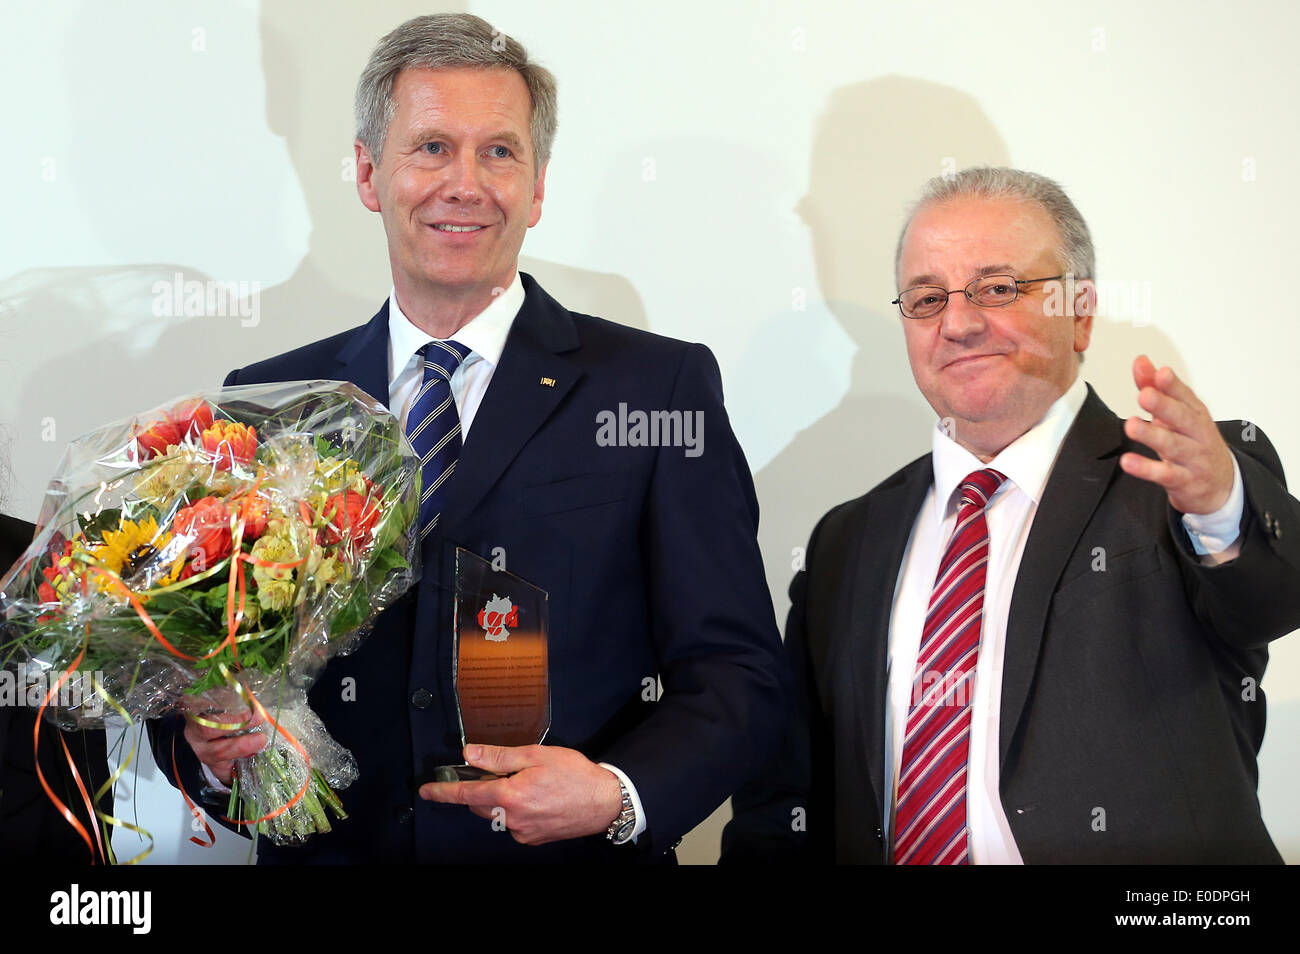 Berlin, Germany. 10th May, 2014. Former German President Christian Wulff stands with chairman of the community Kenan Kolat during the 10th federal congress of the Turkish community in Germany in Berlin, Germany, 10 May 2014. Wulff has been distinguished for his efforts for equality among people of different cultures and religious backgrounds. Photo: WOLFGANG KUMM/dpa/Alamy Live News Stock Photo